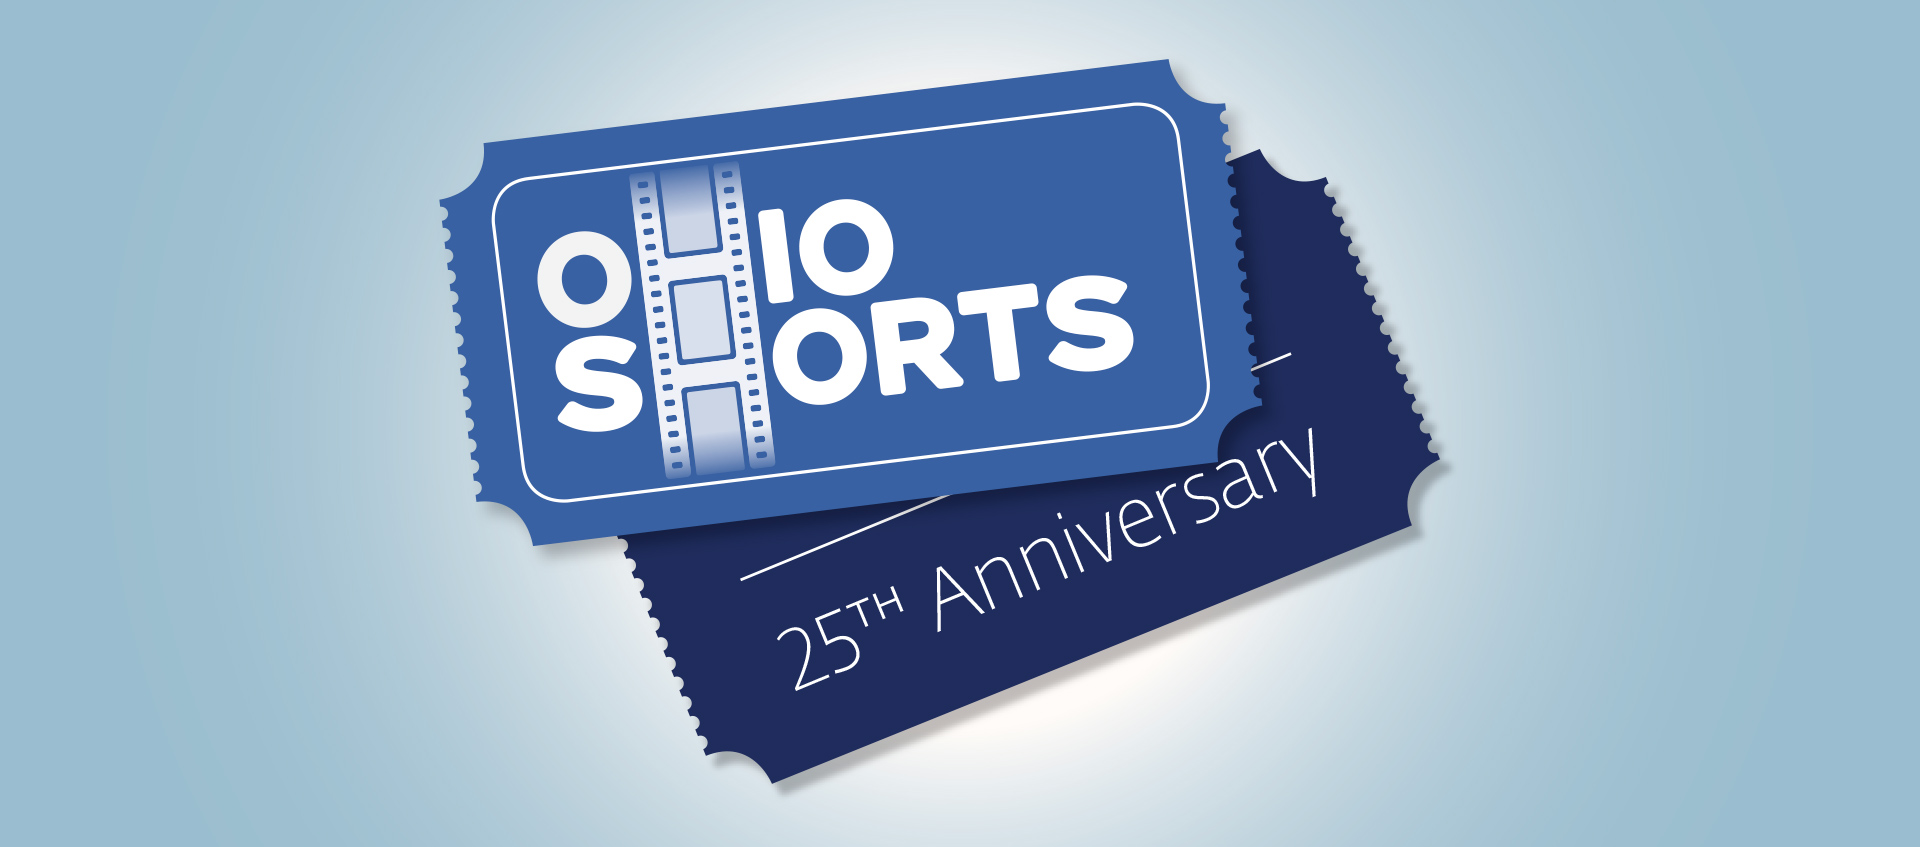 A graphic with two tickets that say "Ohio Shorts" and "25th Anniversary"